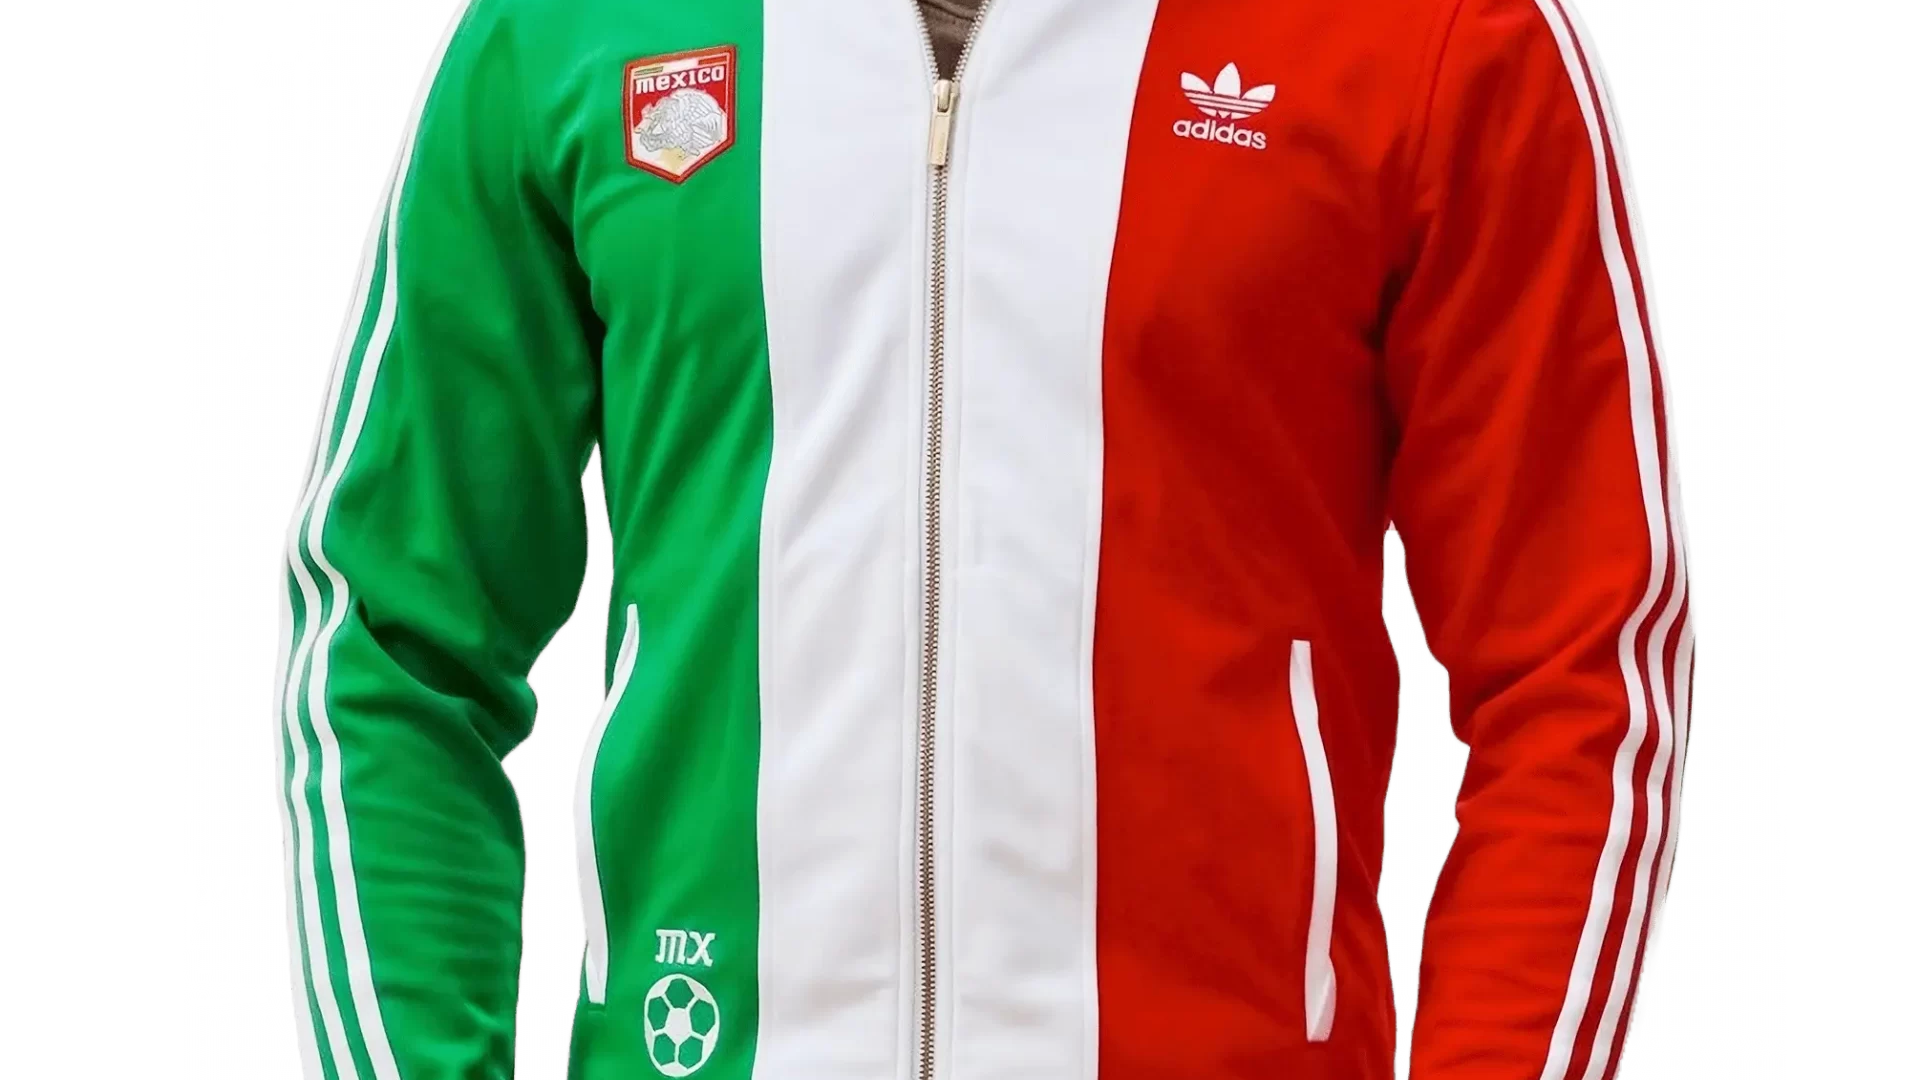 Men's 2007 Mexico Track Top by Adidas Originals: Approved (EnLawded.com file #lmchk53714ip2y123334kg9st)